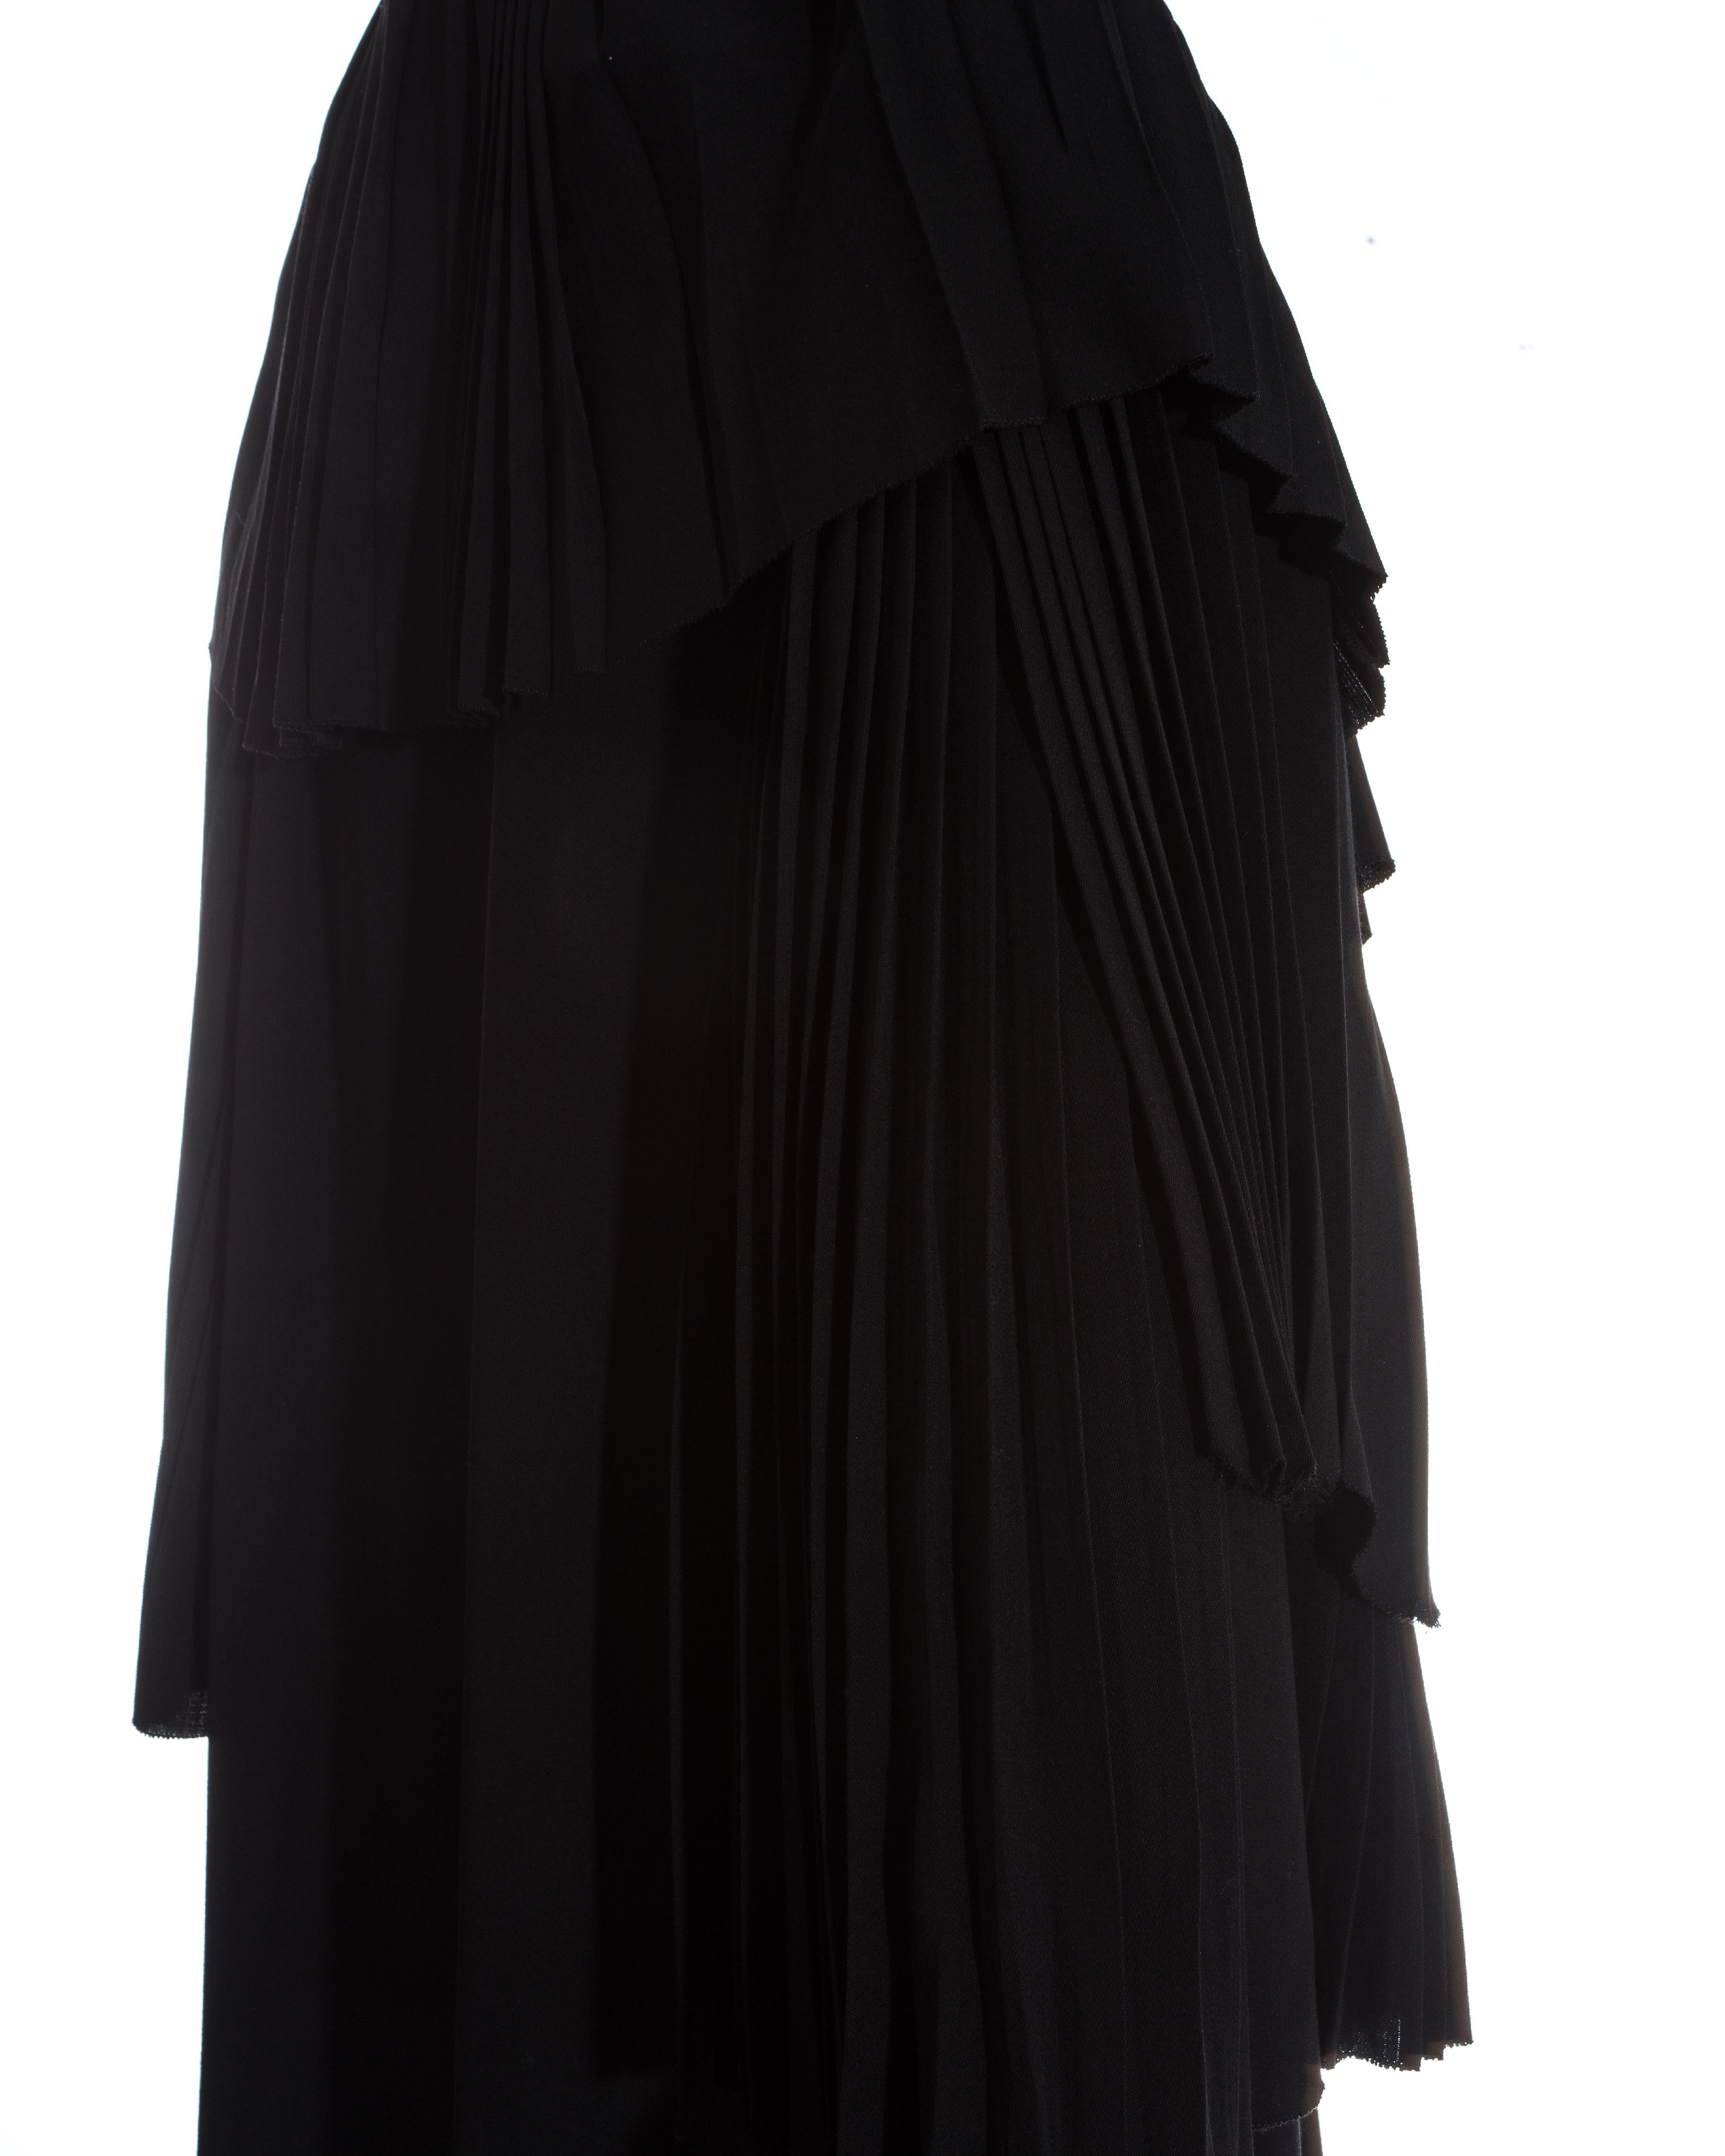 Yohji Yamamoto black wool pleated evening cape, c. 1990 In Excellent Condition For Sale In London, GB